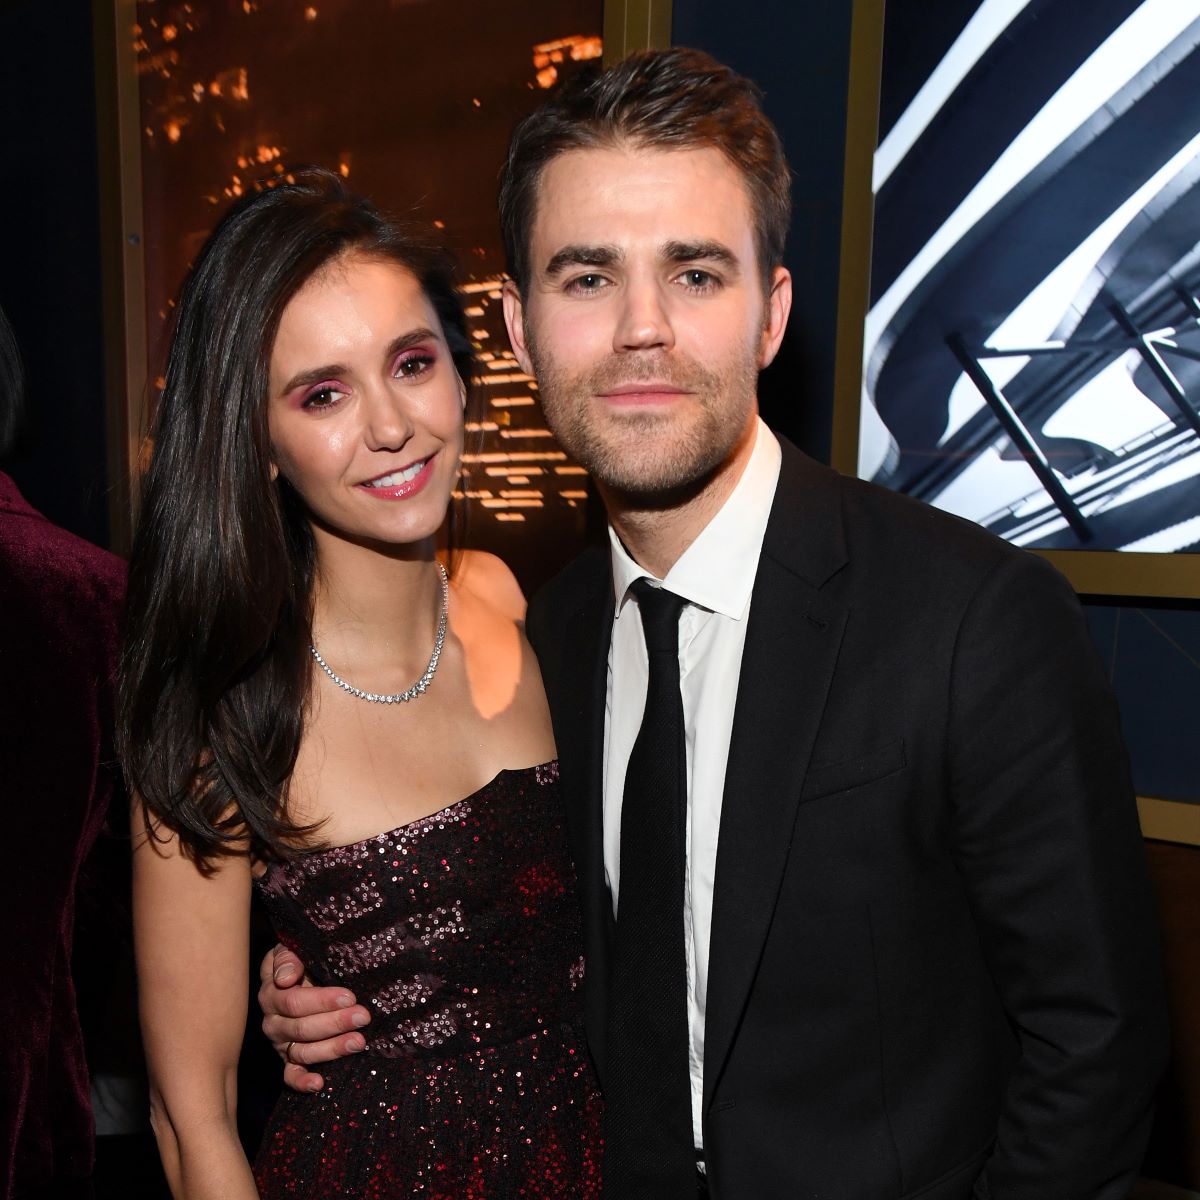 Nina Dobrev and Paul Wesley of 'The Vampire Diaries' pose together